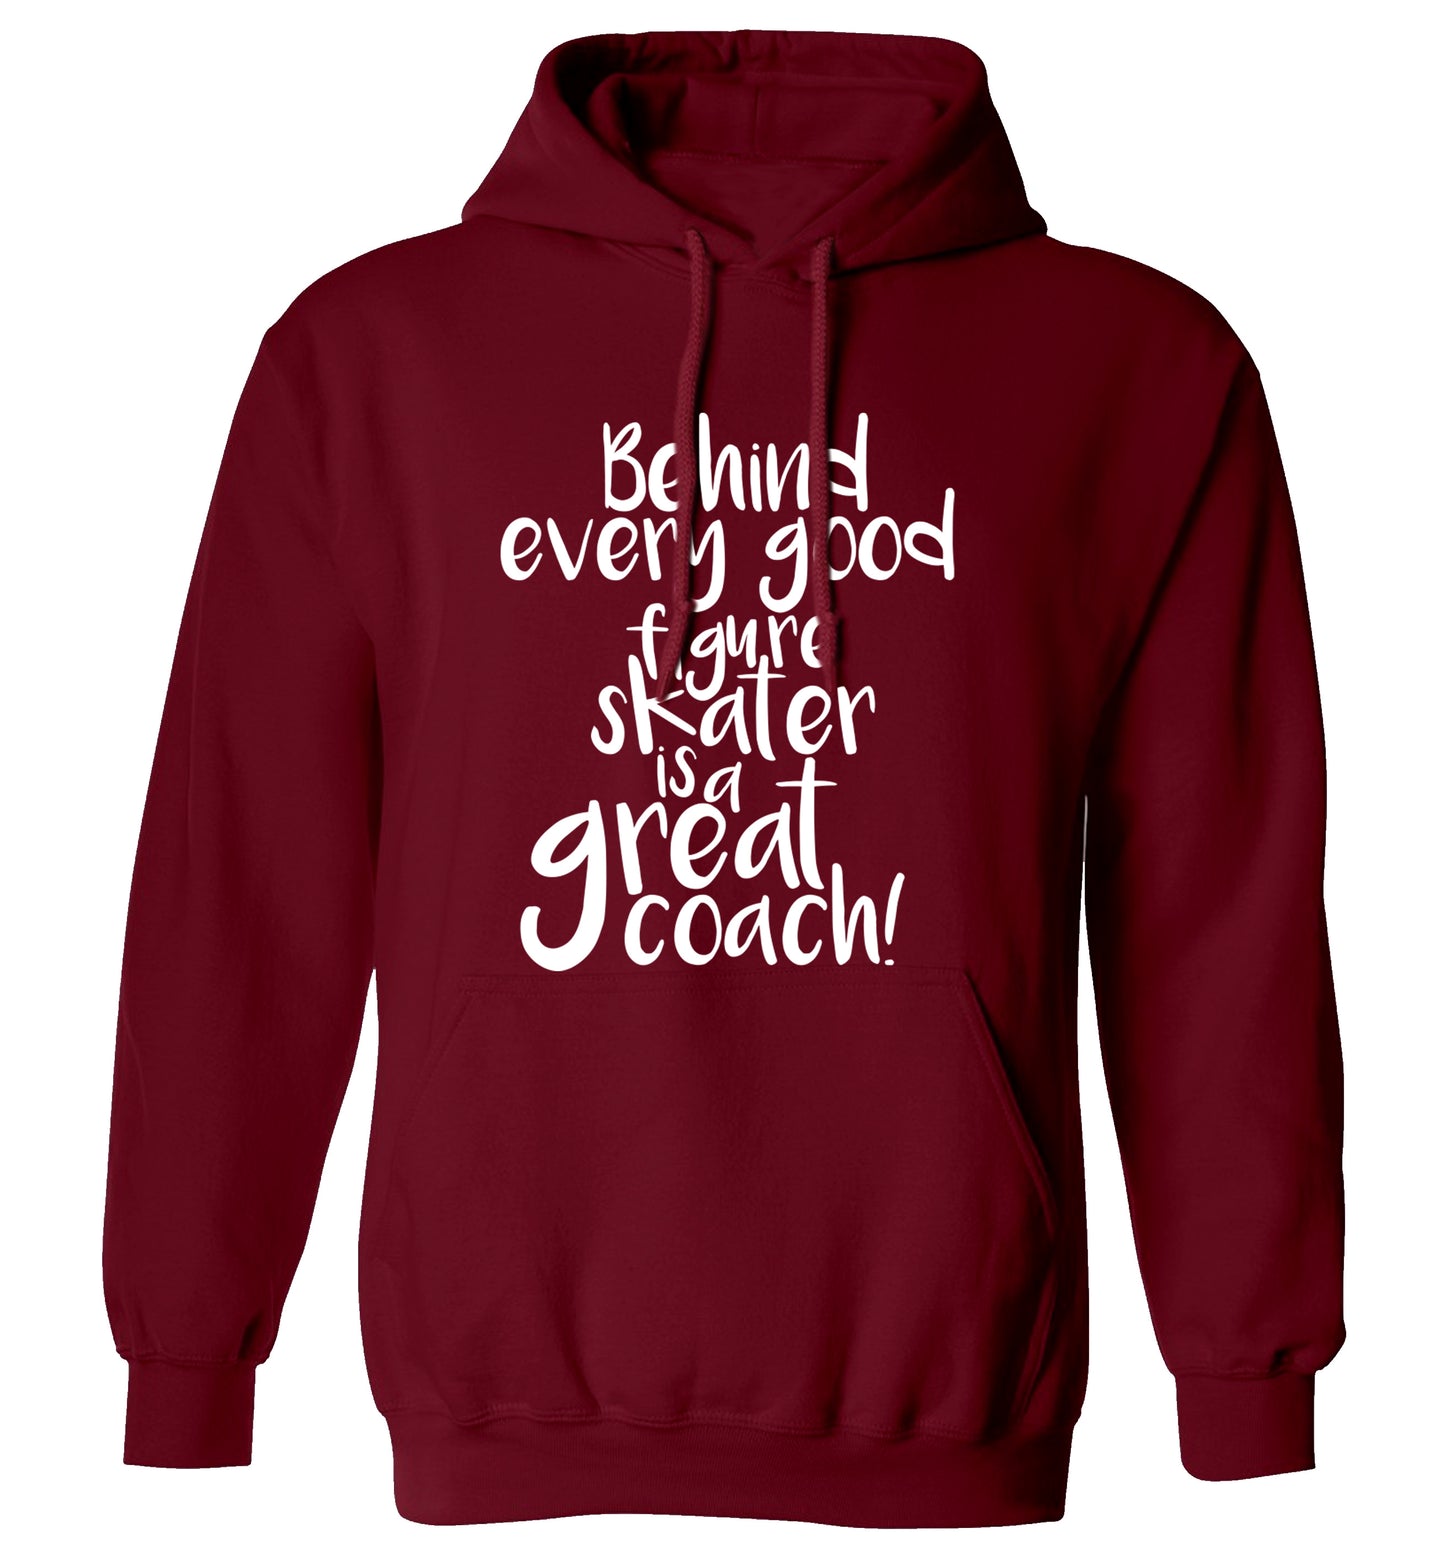 Behind every good figure skater is a great coach adults unisexmaroon hoodie 2XL